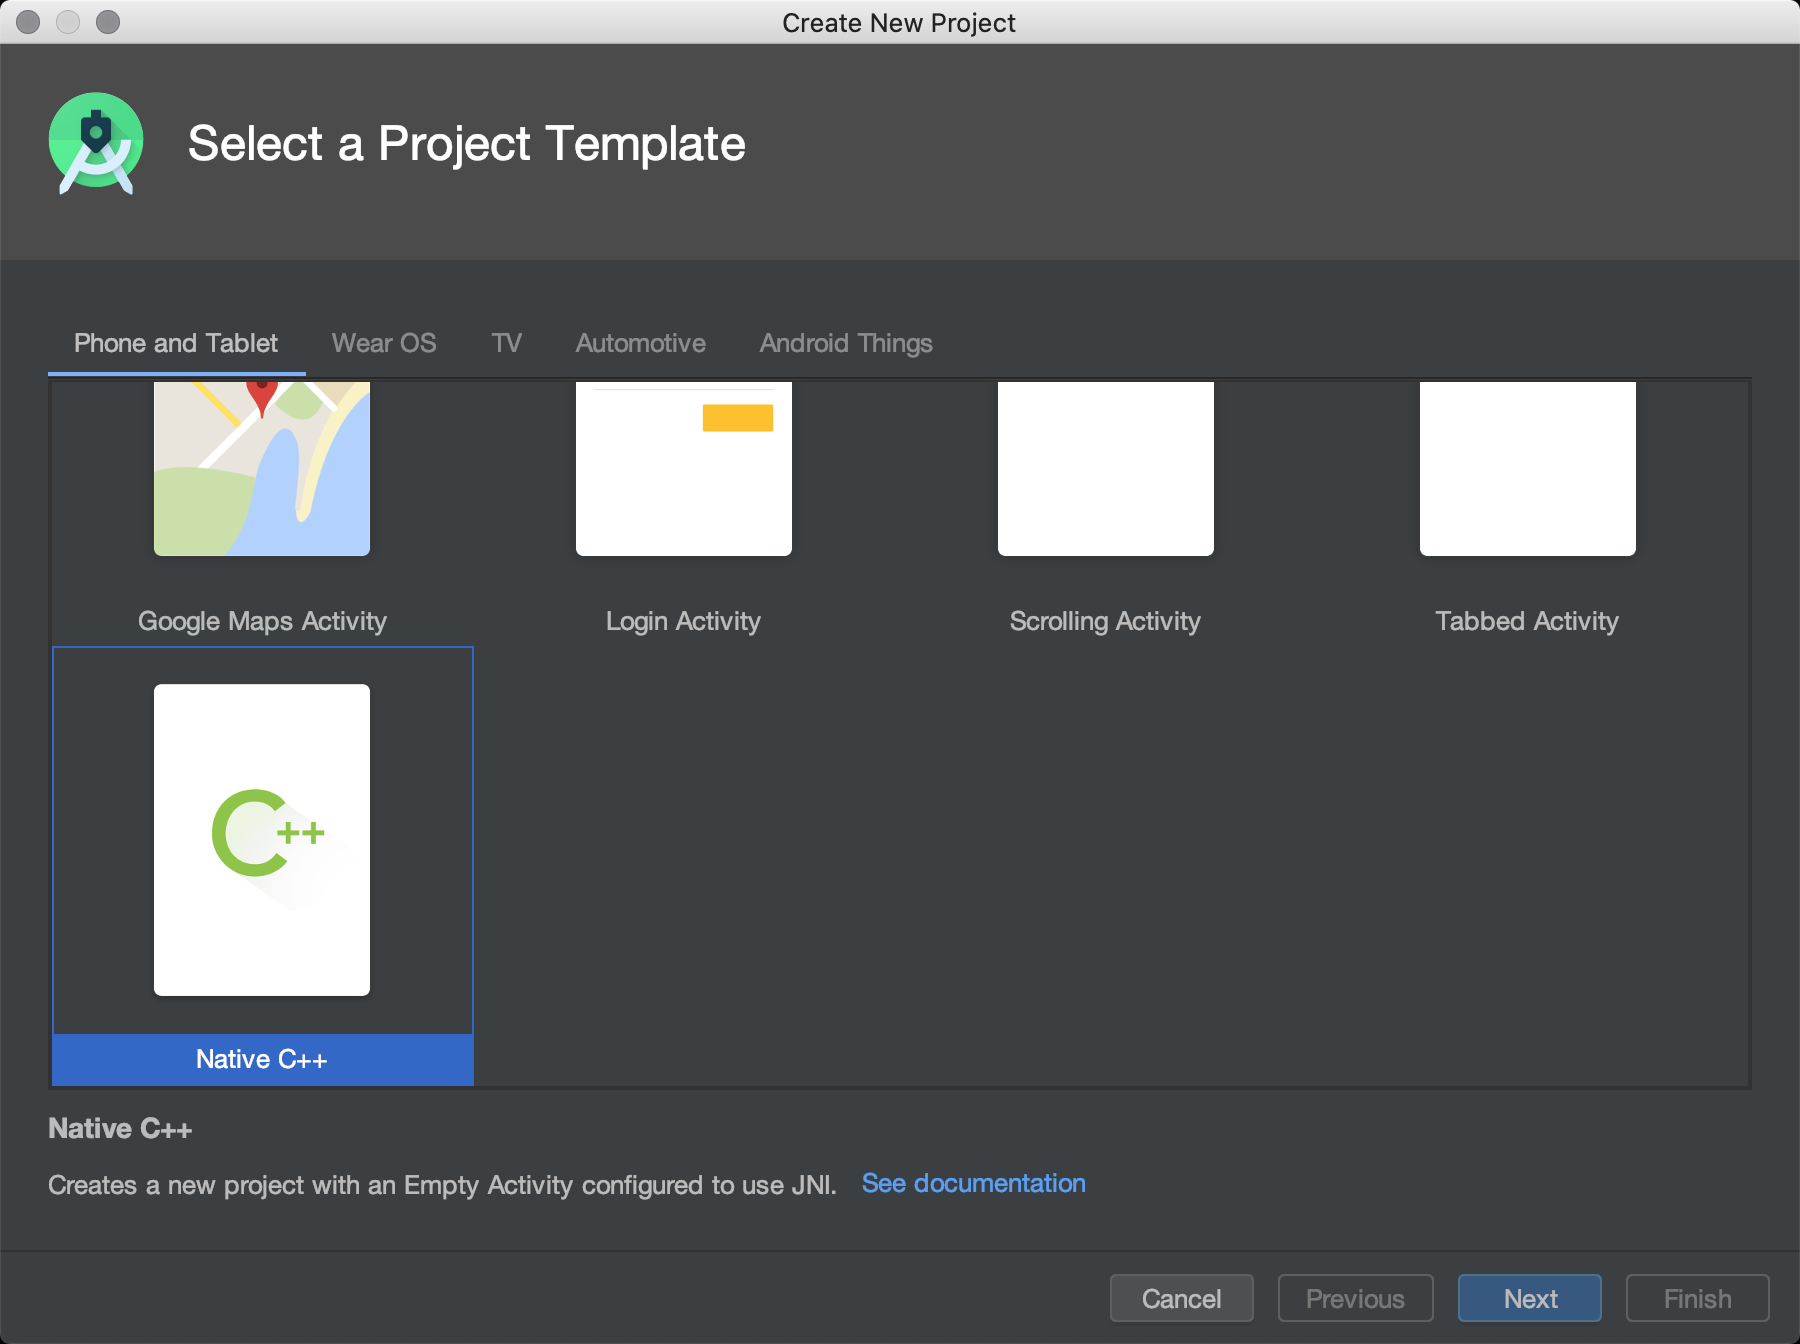 Select a Project Template